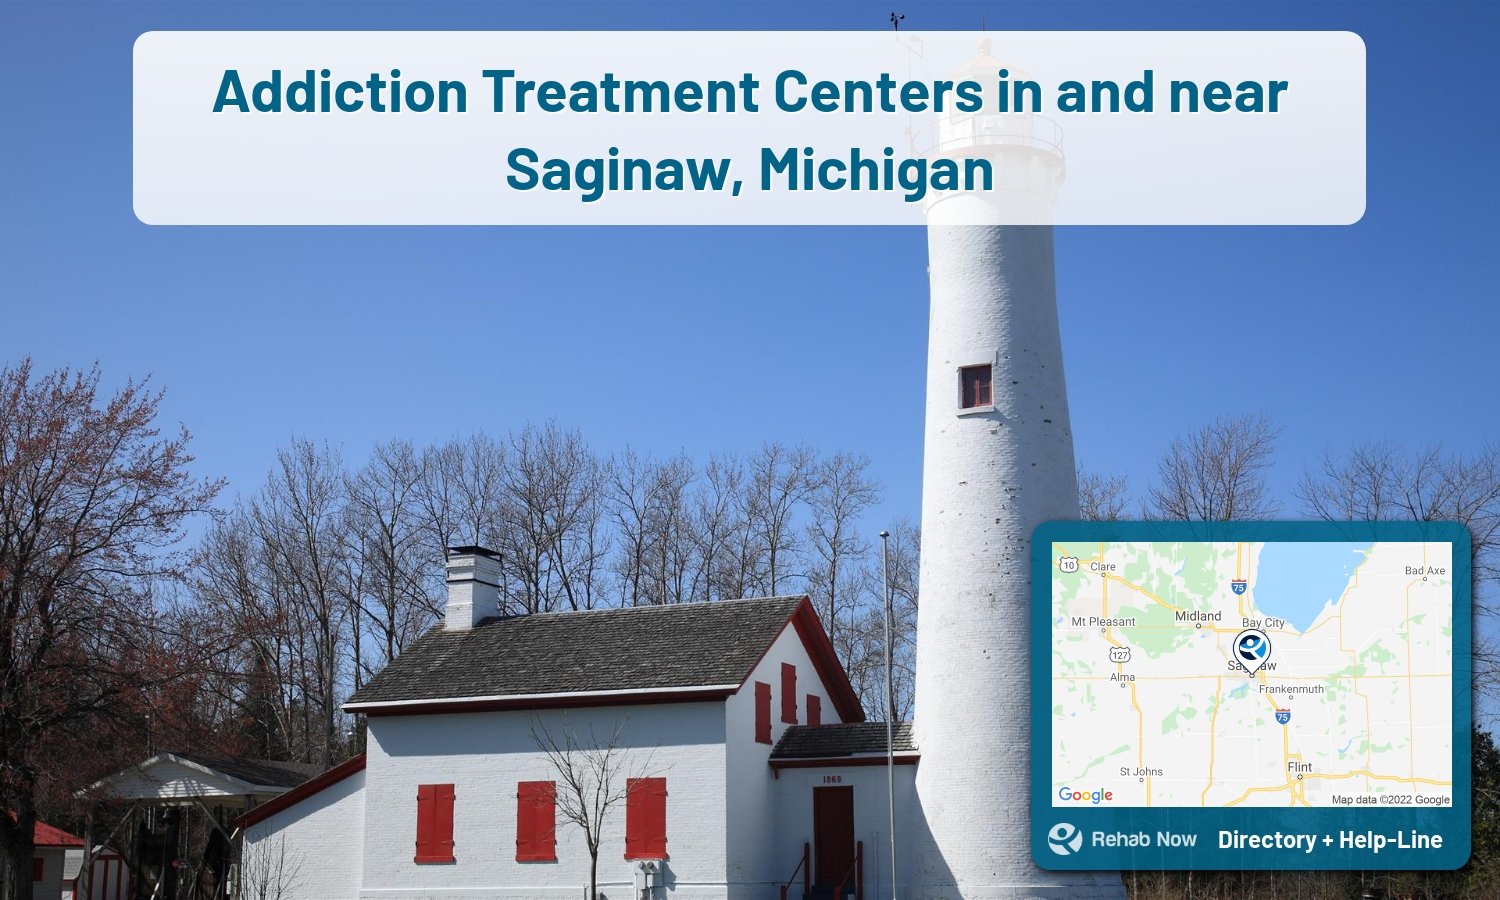 Our experts can help you find treatment now in Saginaw, Michigan. We list drug rehab and alcohol centers in Michigan.